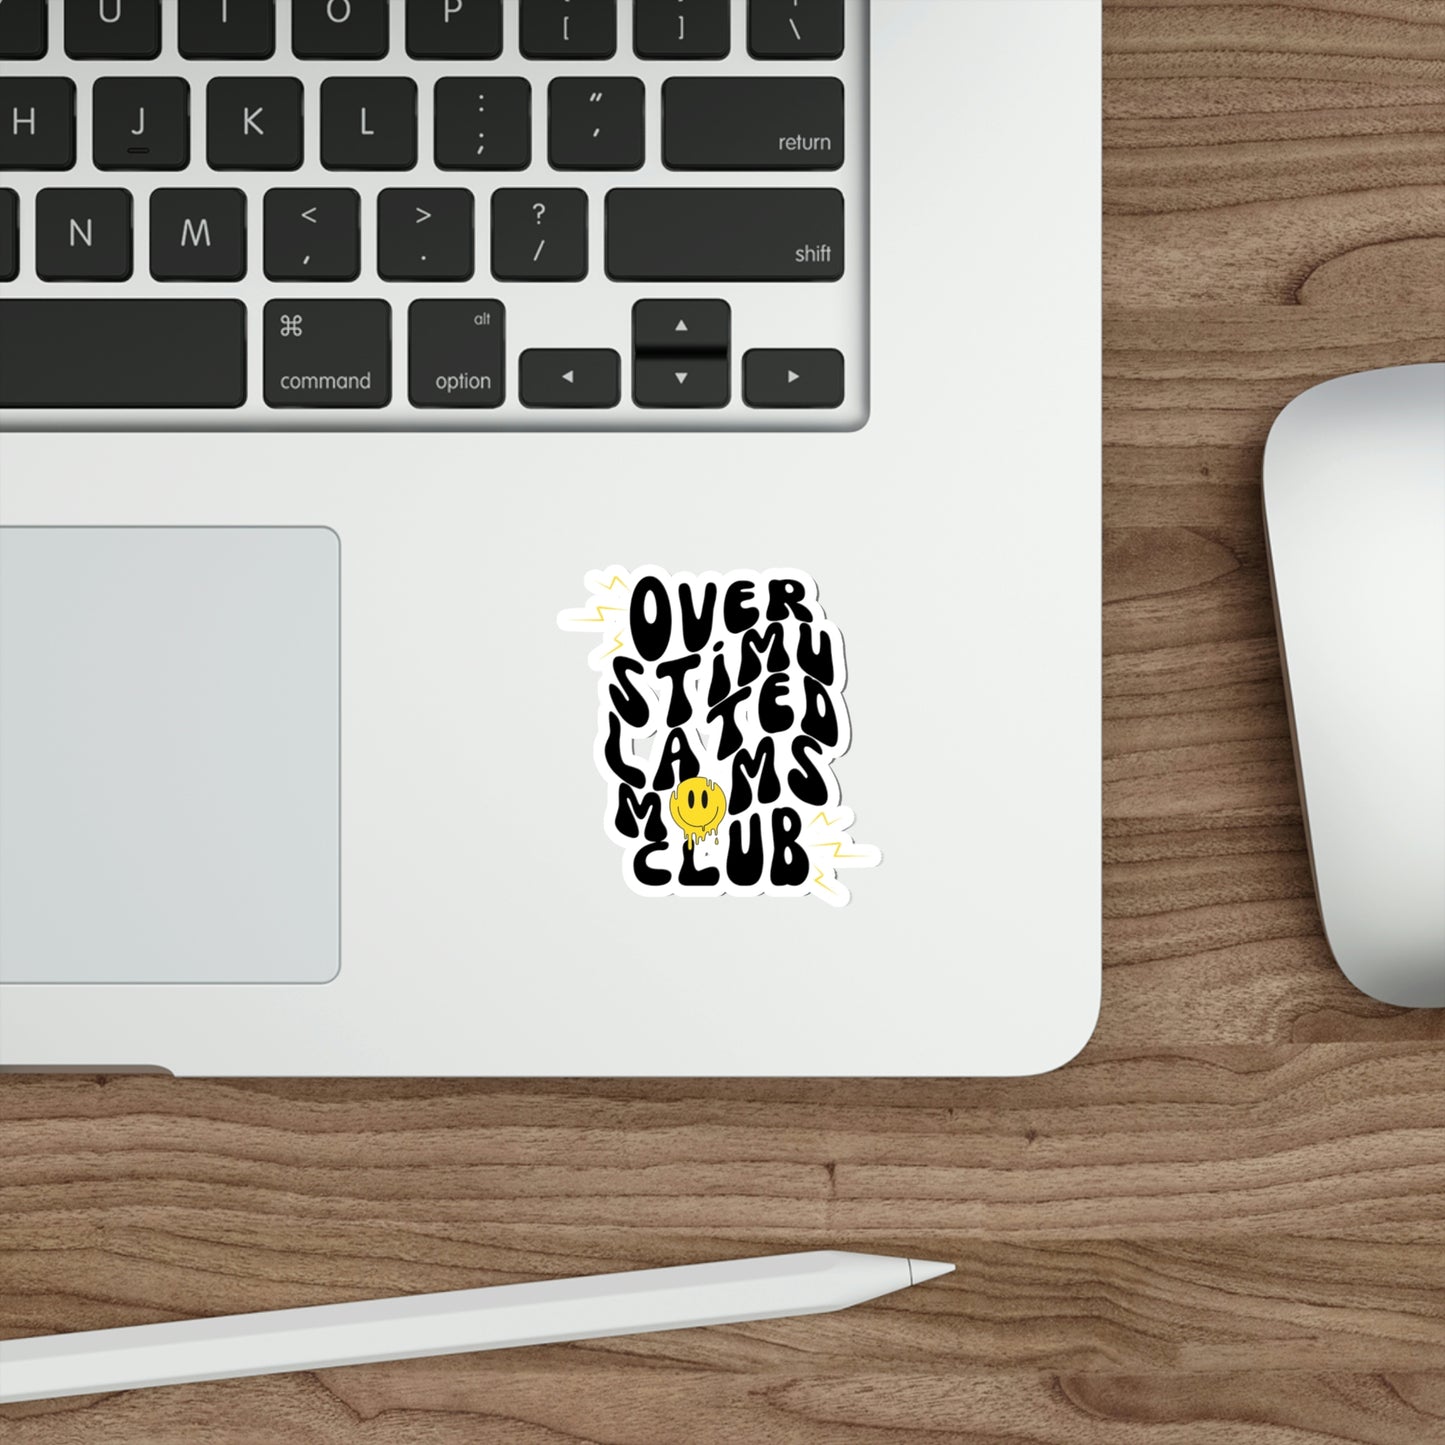 Overstimulated Moms Club Stickers